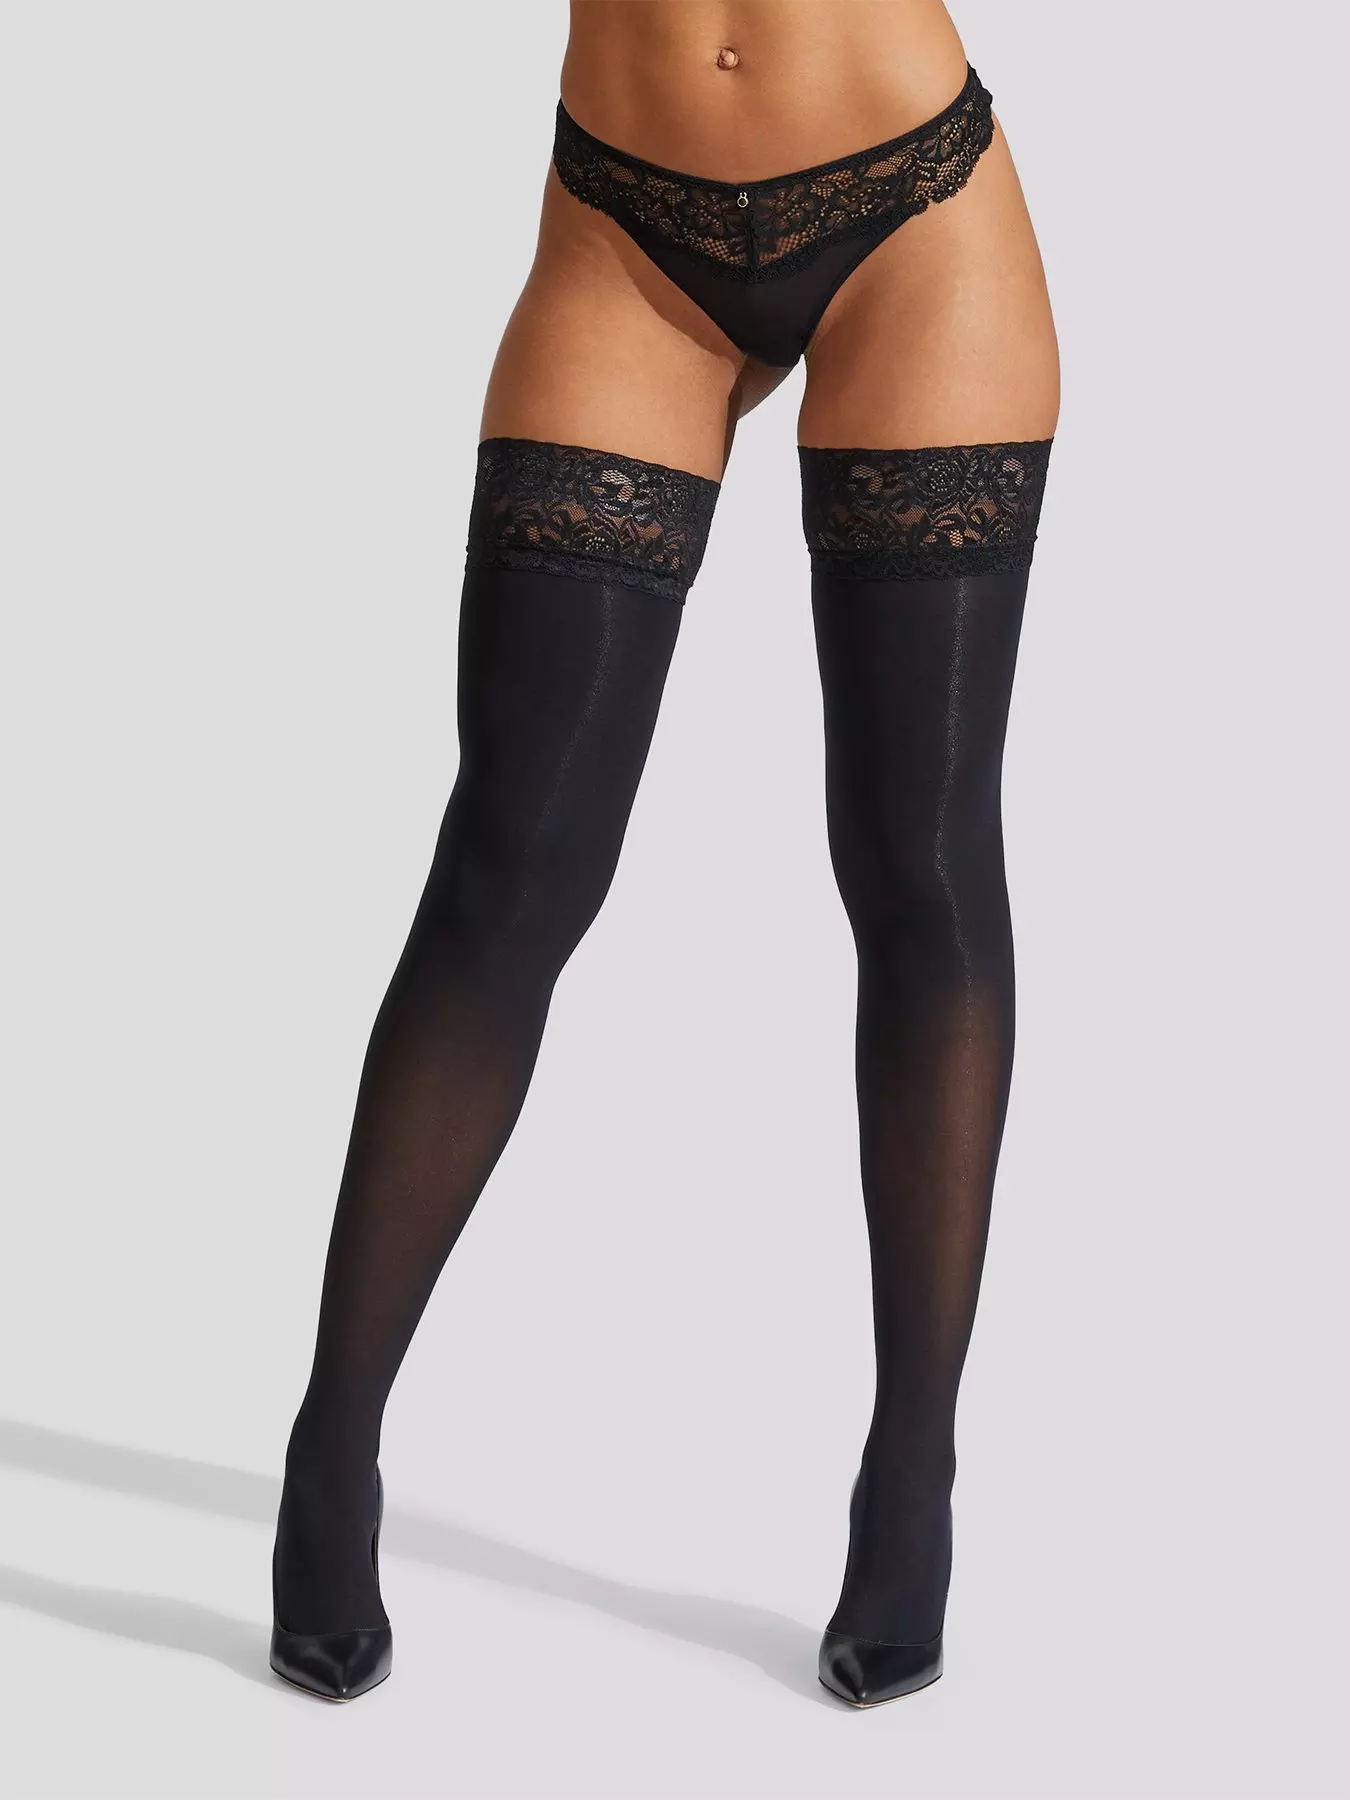 Cropped back view shot of lady's body, wearing black stockings with lace  welt with floral pattern.